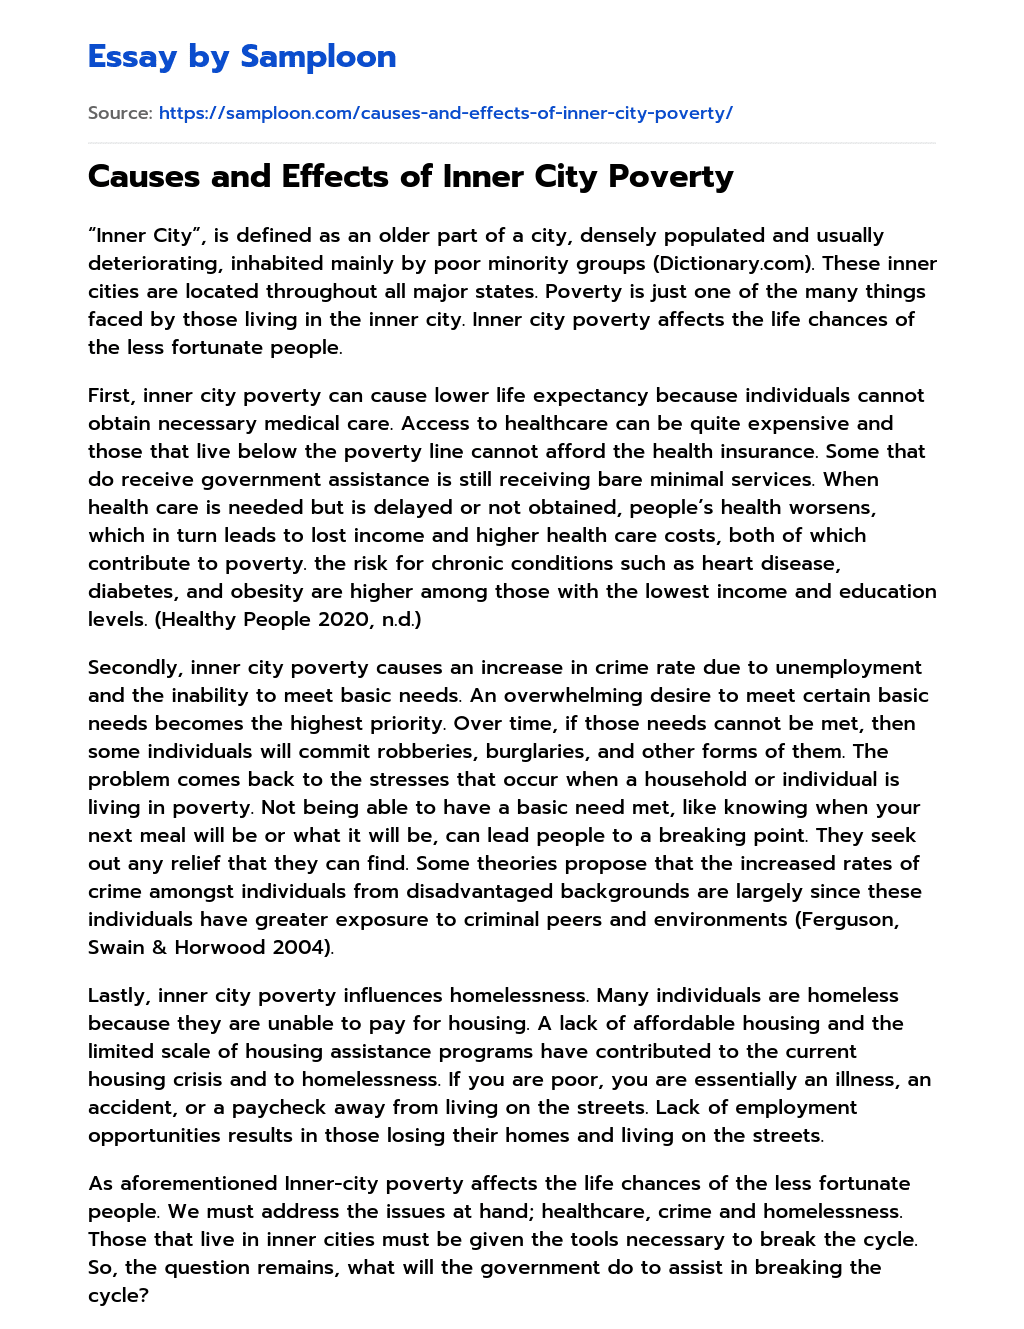 Causes and Effects of Inner City Poverty essay